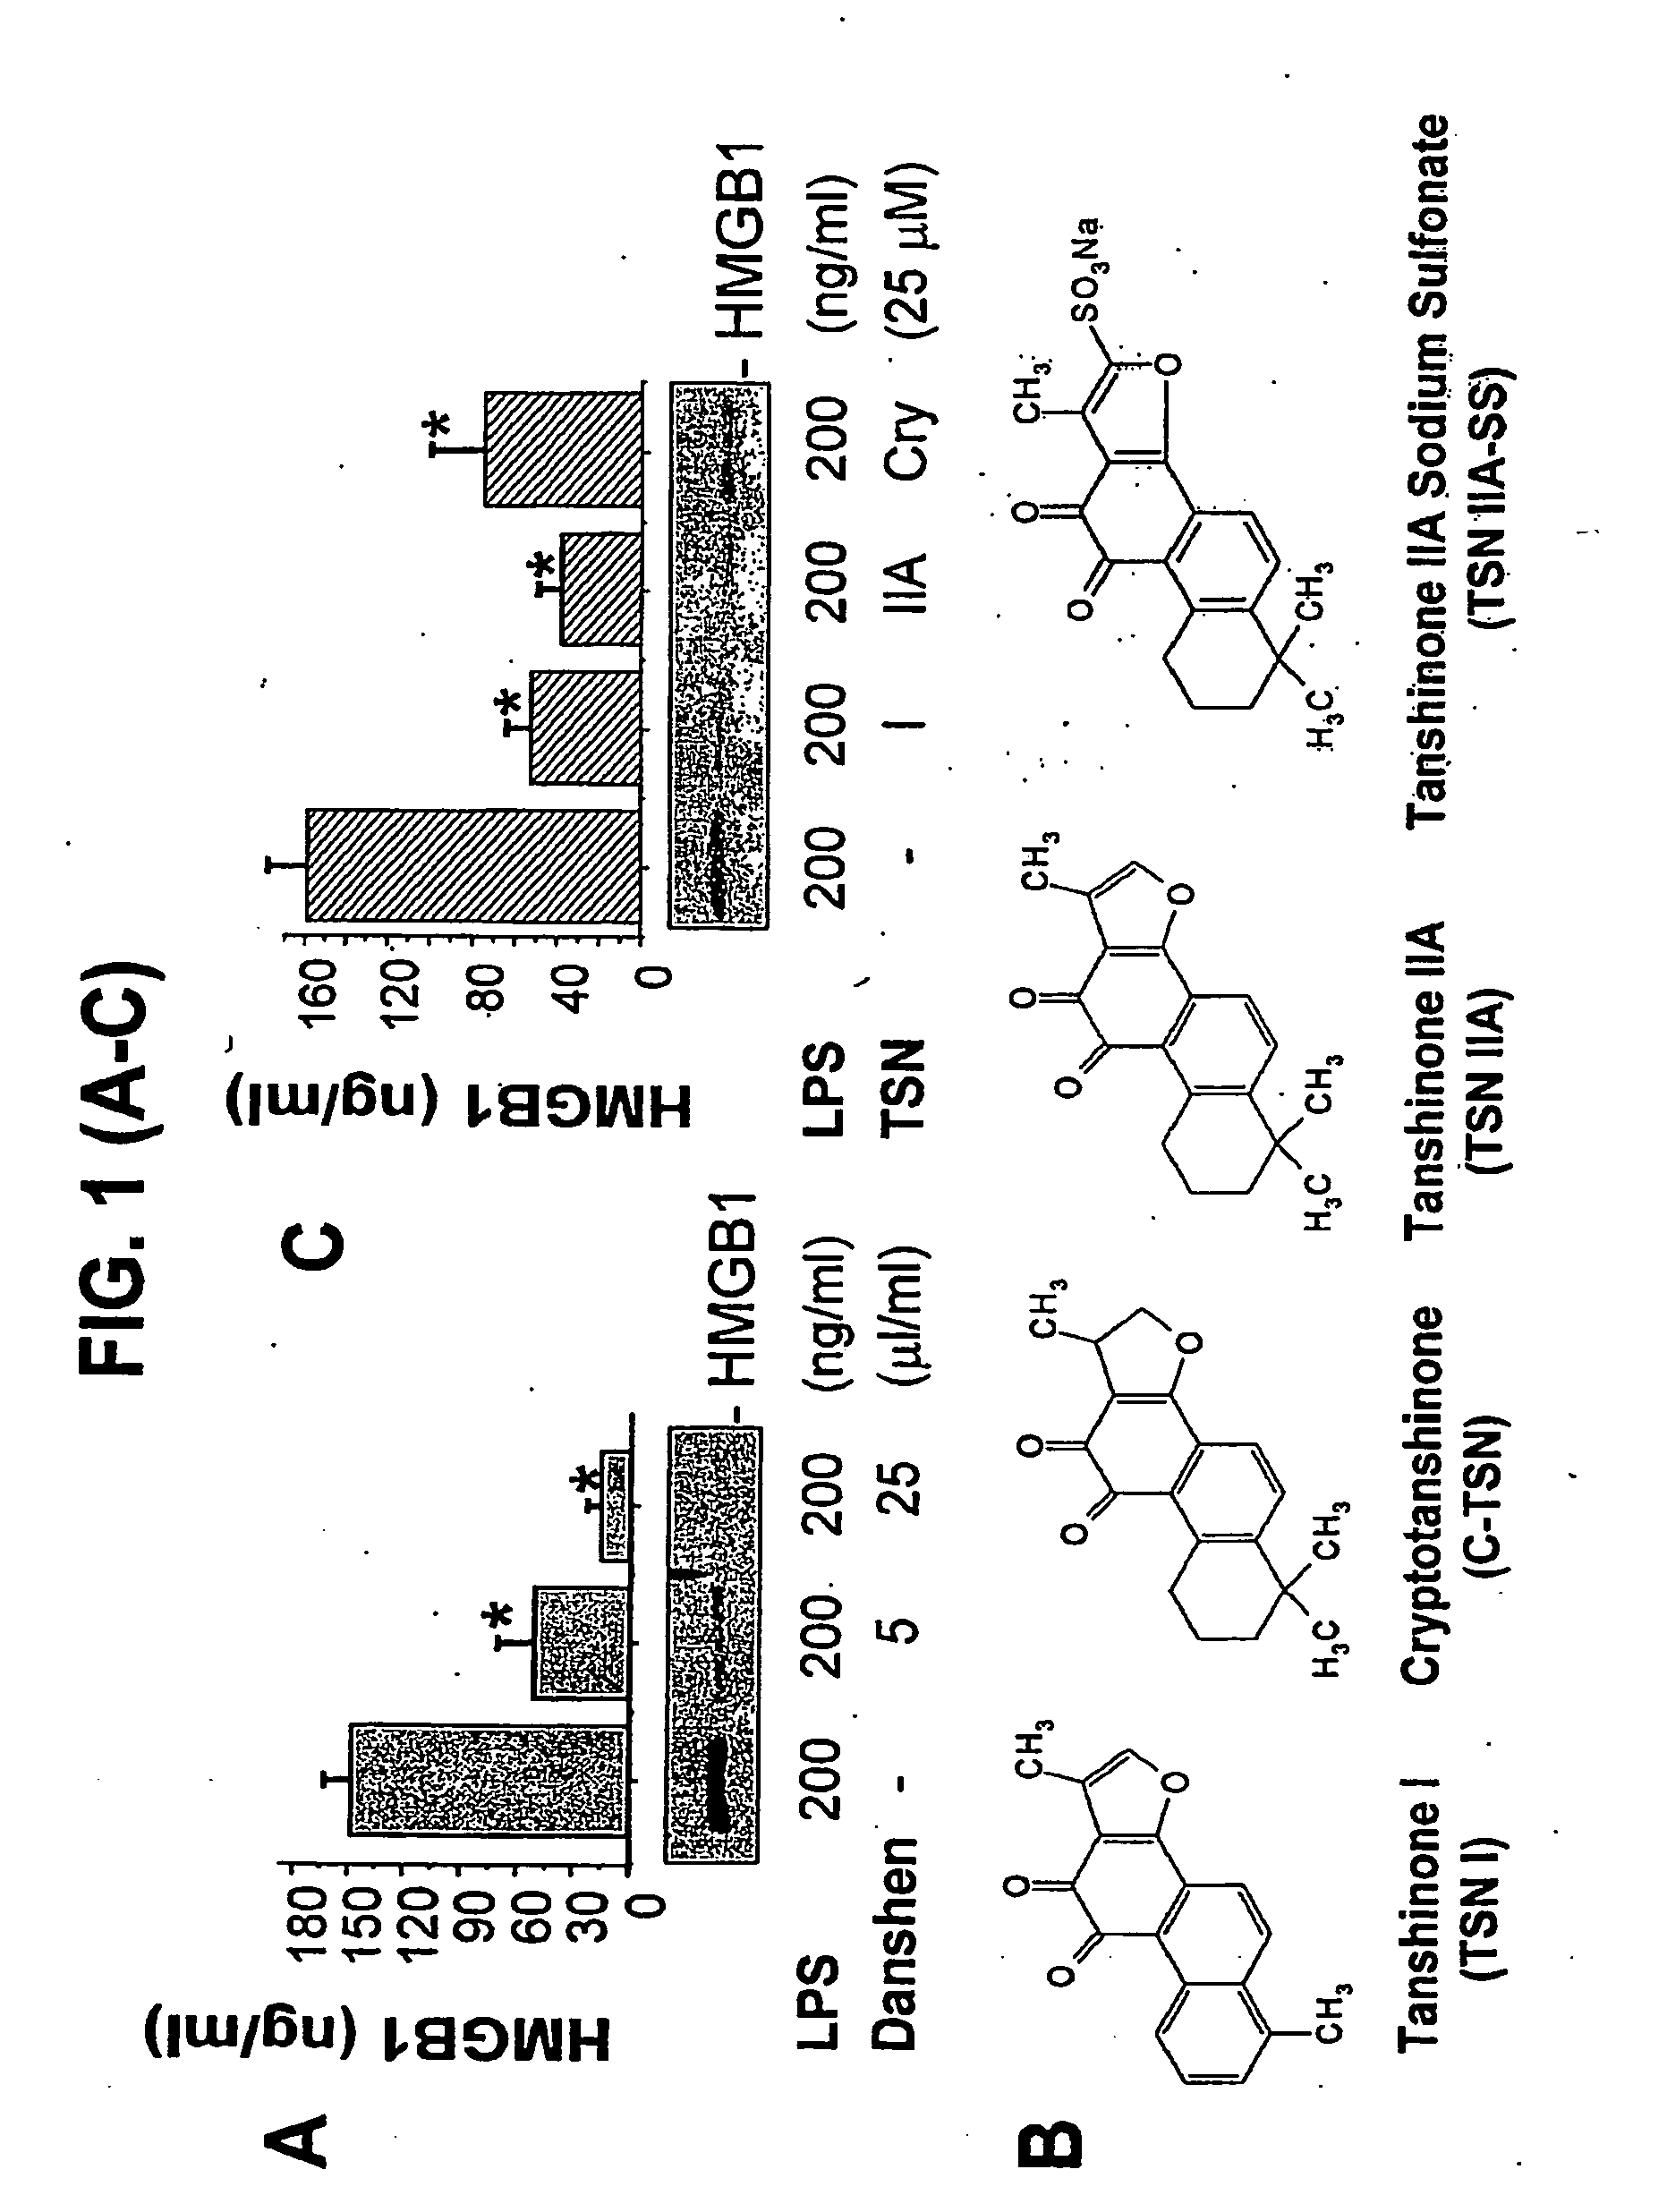 Inhibition of Inflammatory Cytokine Production With Tanshinones